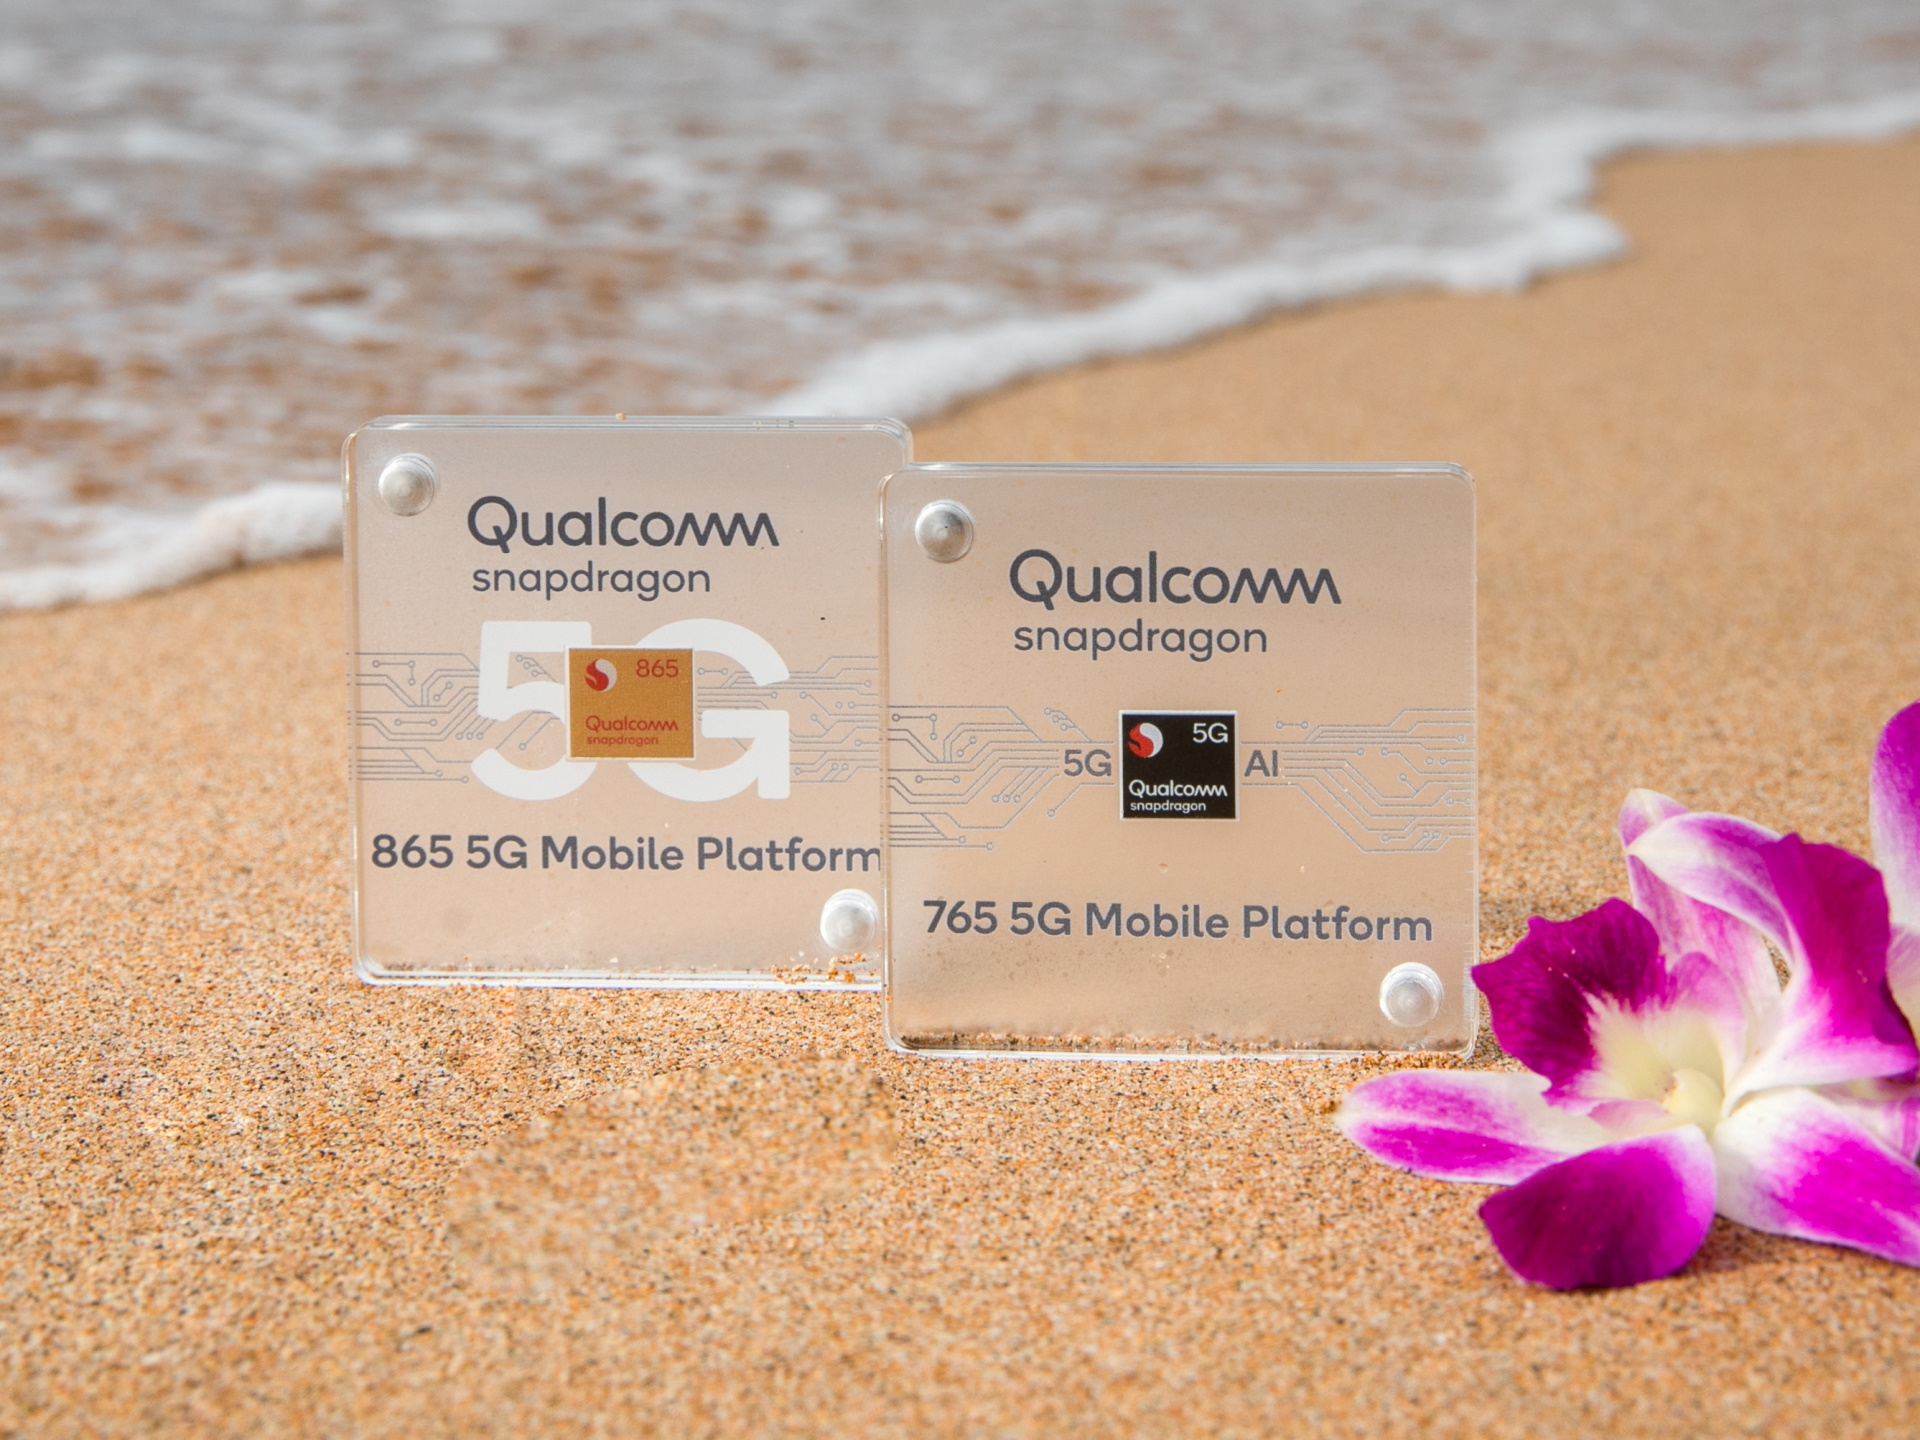 qualcomm snapdragon 865 5g and 765 5g mobile platform chip cases outdoors in maui